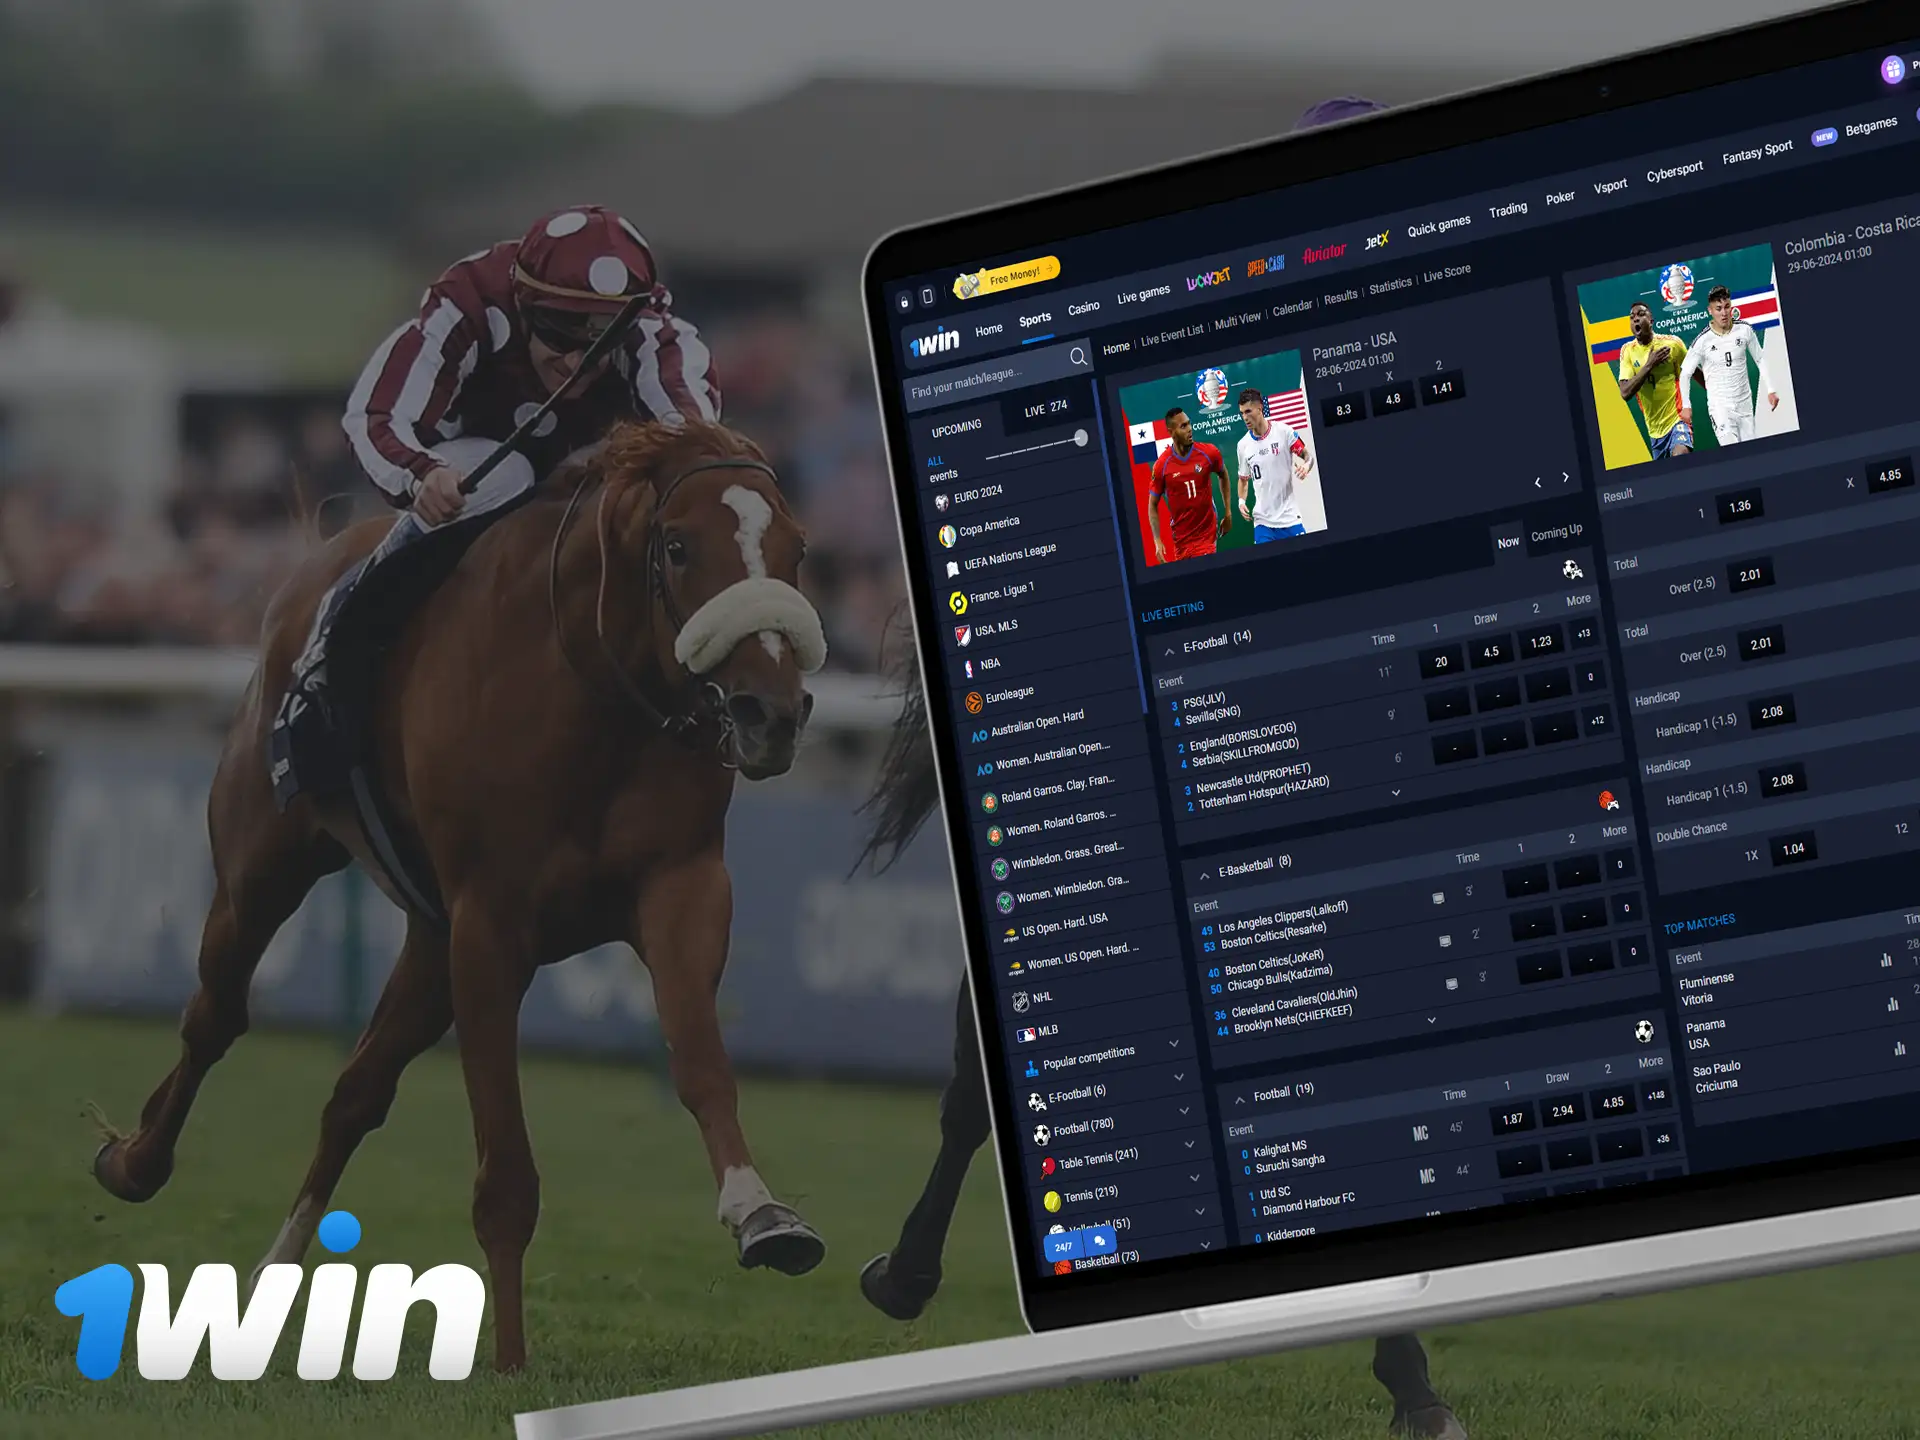 Horse racing is one of the most exciting sports you can bet on at 1Win.